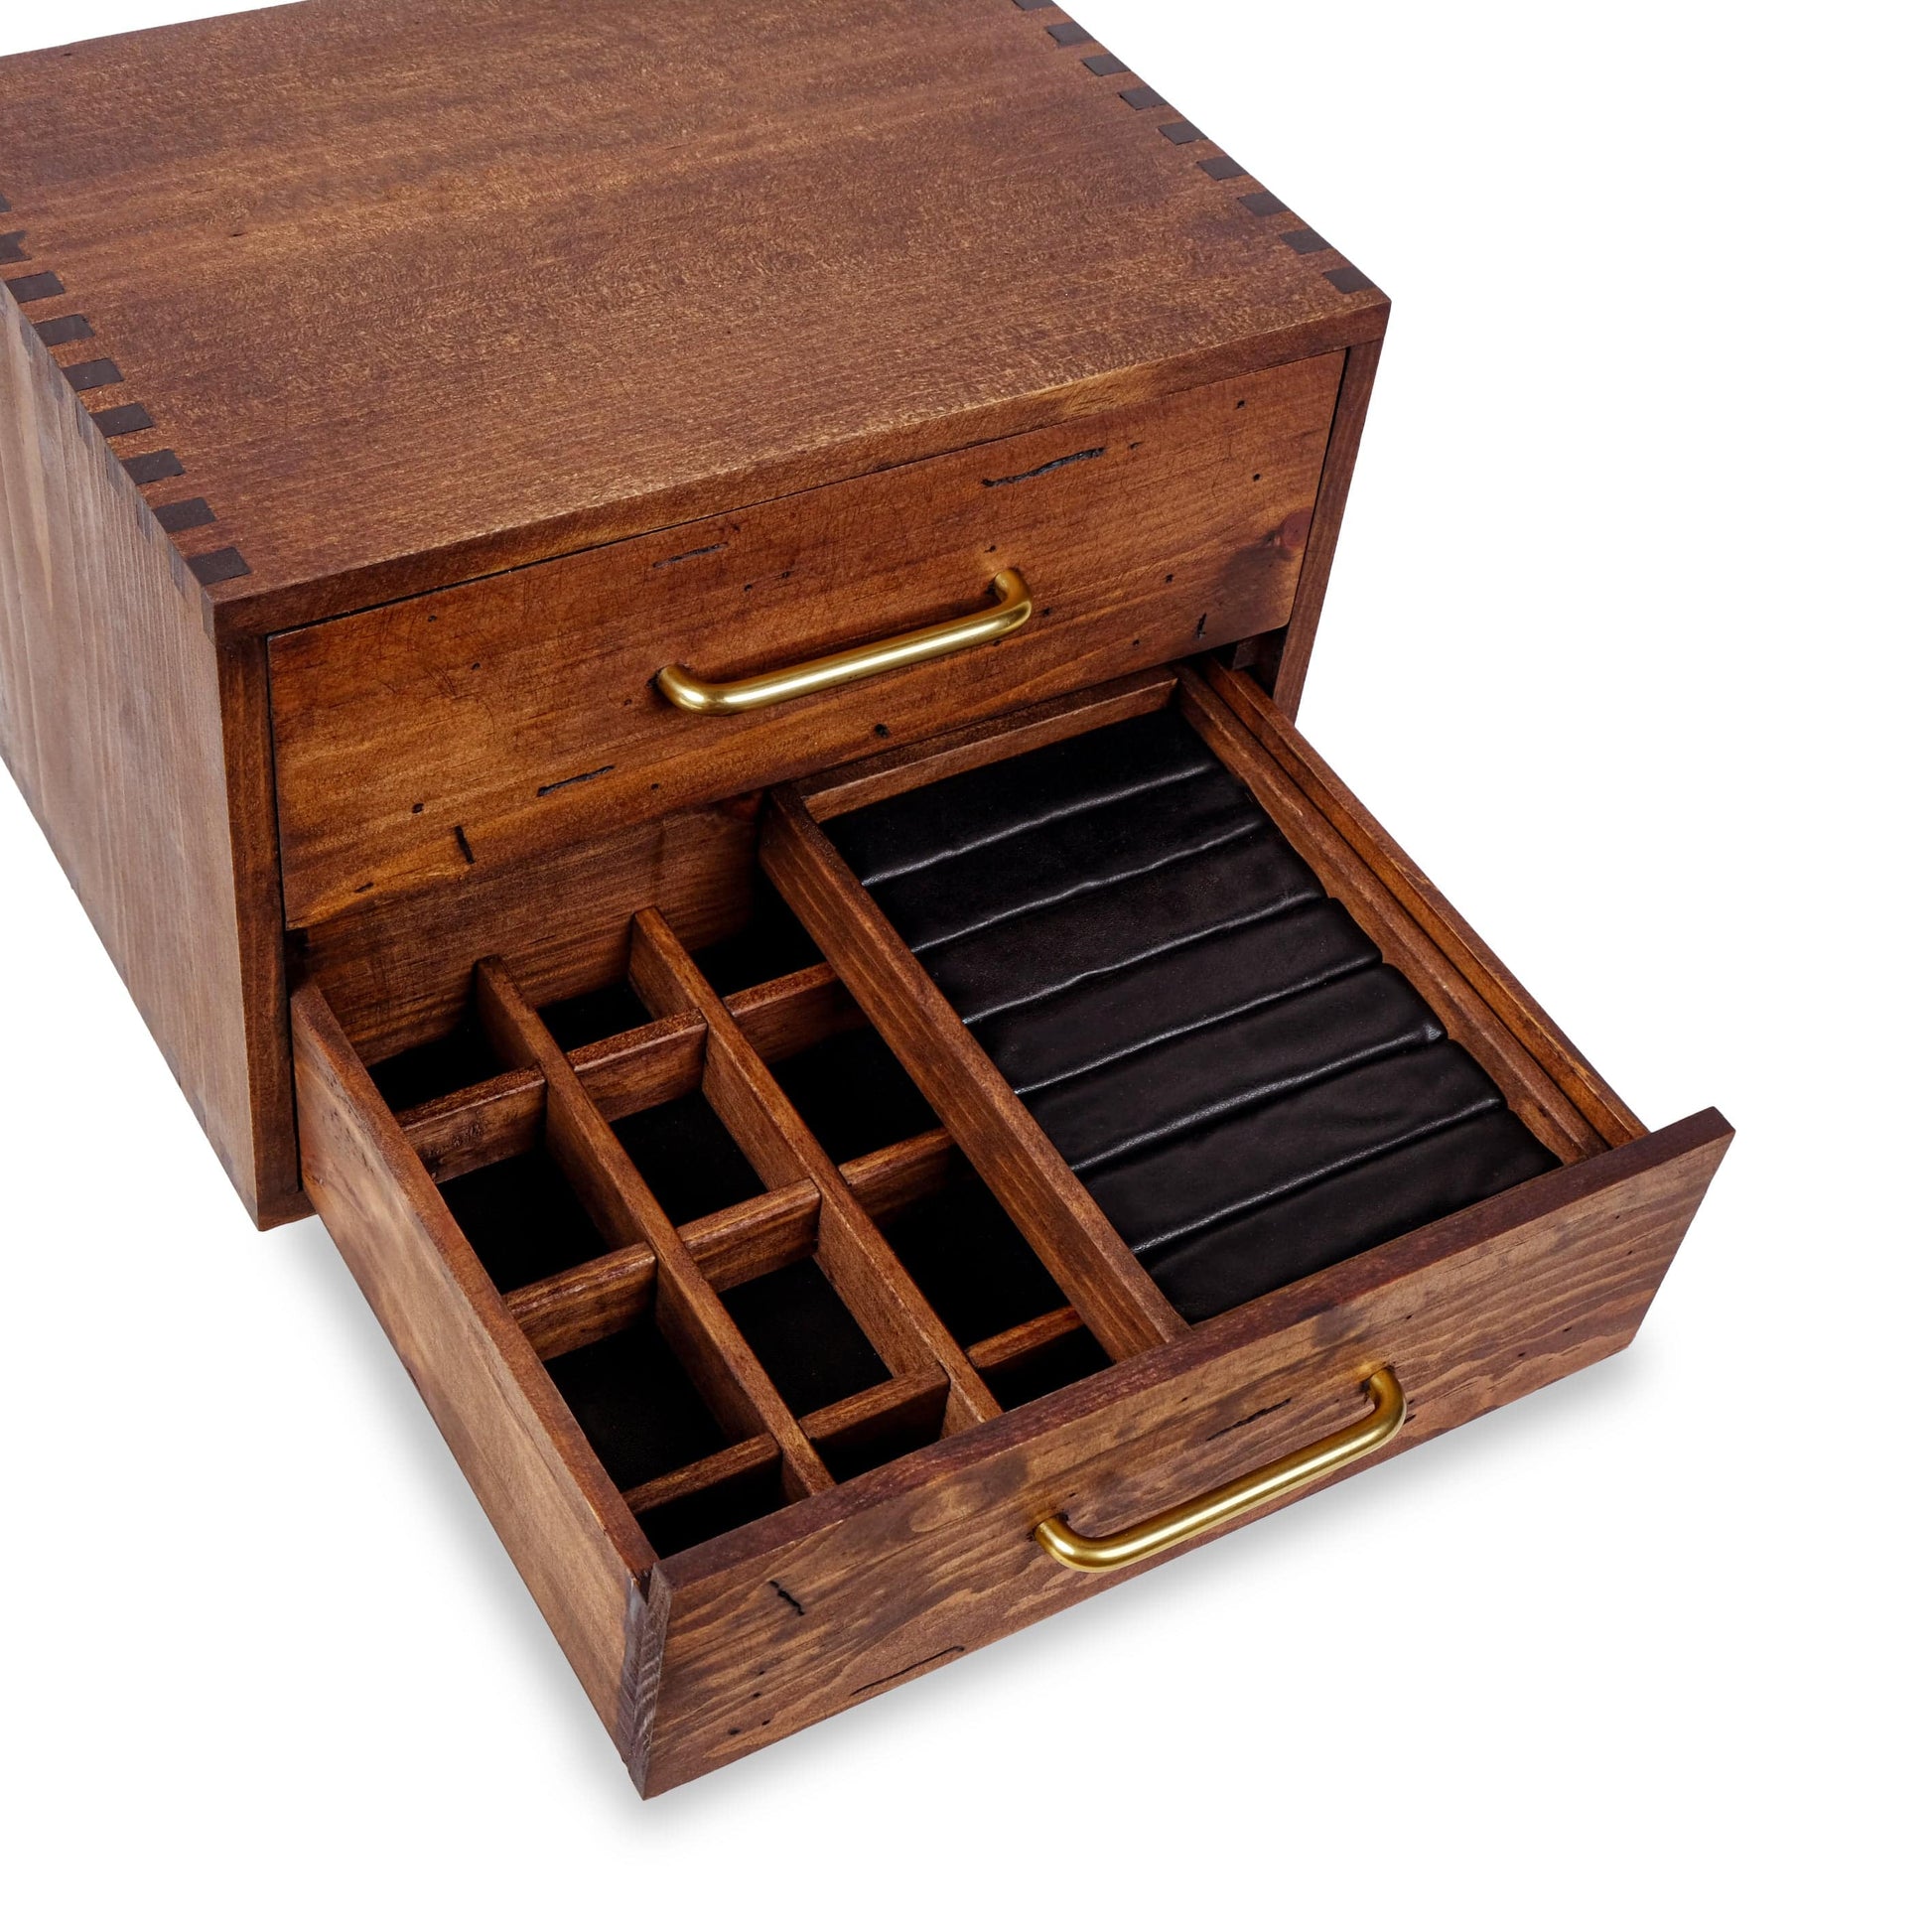 Retro Wooden Small Chest of 9 Drawer Storage Cabinet Trinket Box Jewelry  Case UK